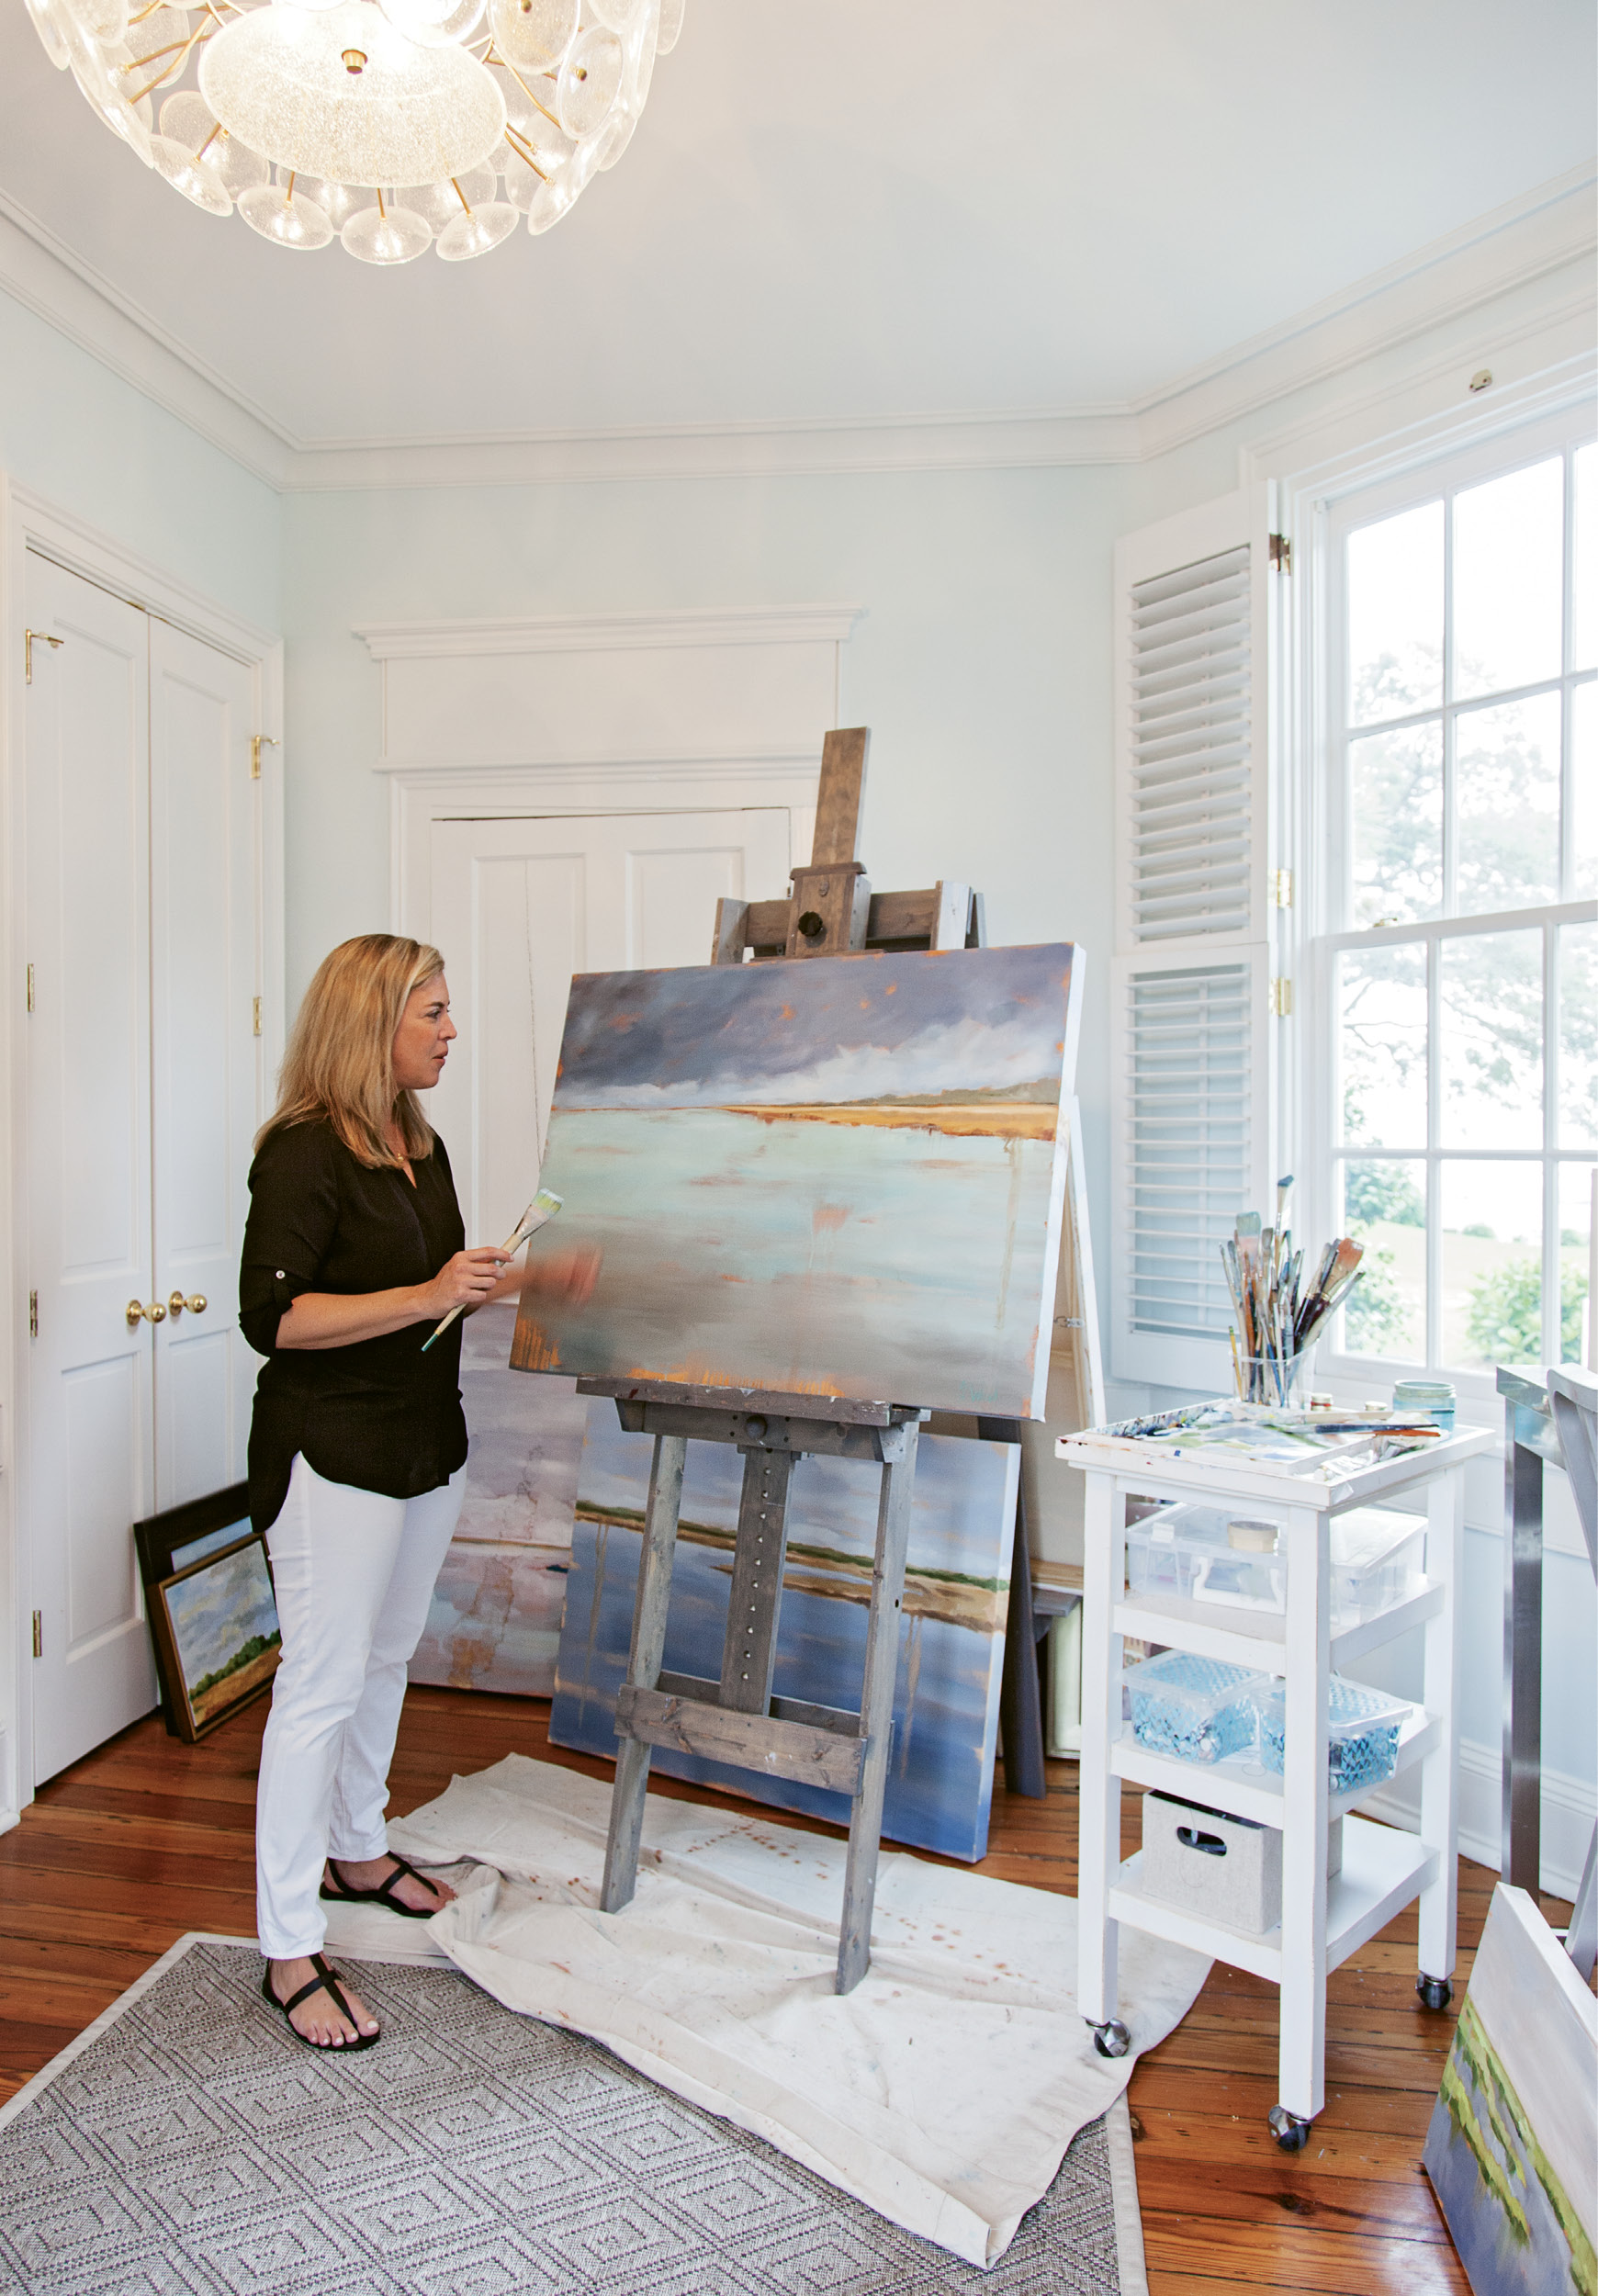 The breathtaking harbor view from Shannon’s airy studio window provides the Lowcountry native with ever-evolving inspiration for her abstract landscape paintings, which are available through the Charleston Artist Collective.